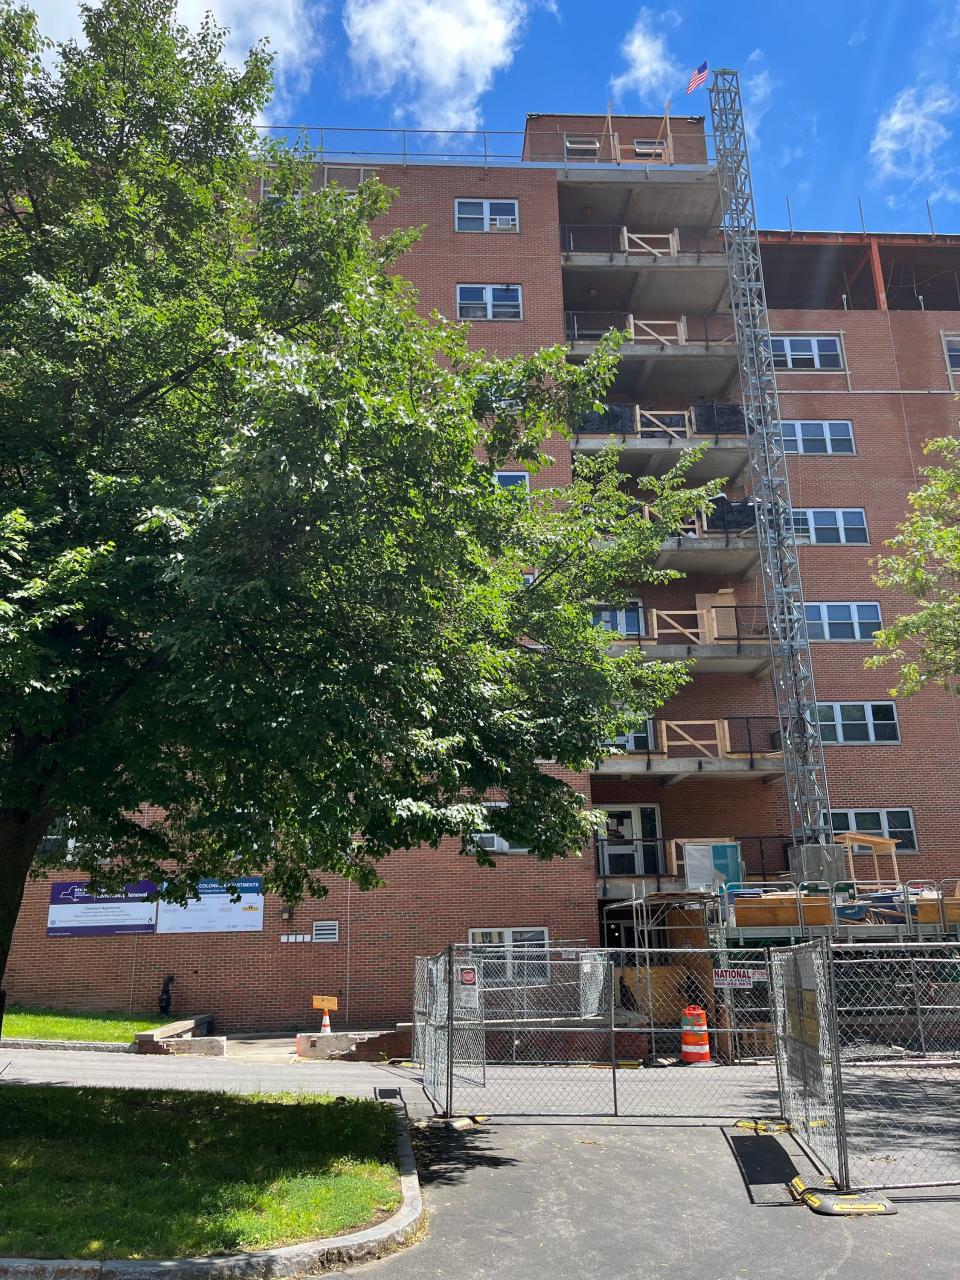 Construction has begun on the $41 million rehabilitation and modernization of Colonial II Apartments in Rome. Pictured is an exterior shot of the building.